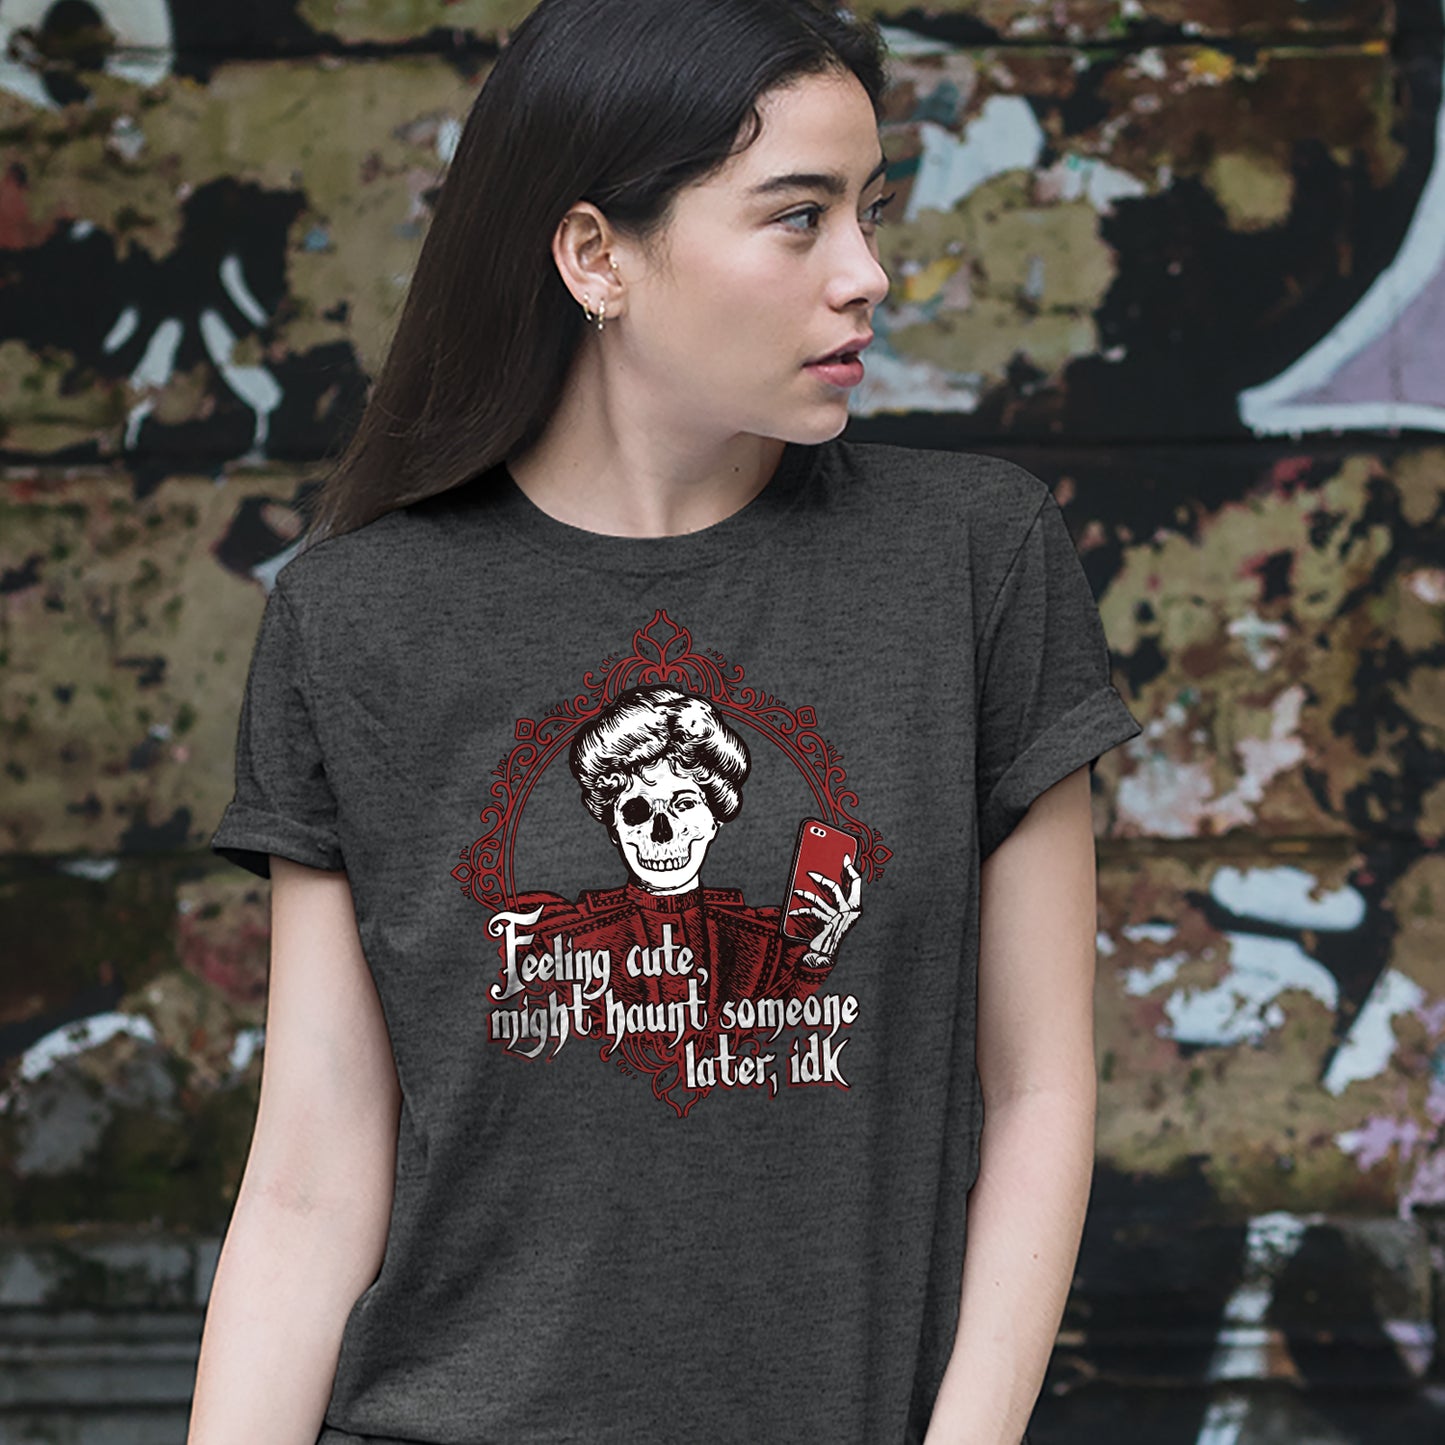 A female model wearing a grey T-shirt, standing against a wall with peeling paint. On the shirt is a skeletal figure holding a red cell phone, surrounded by a red filigreed border. Under the figure in white text is "feeling cute, might haunt someone later, IDK."